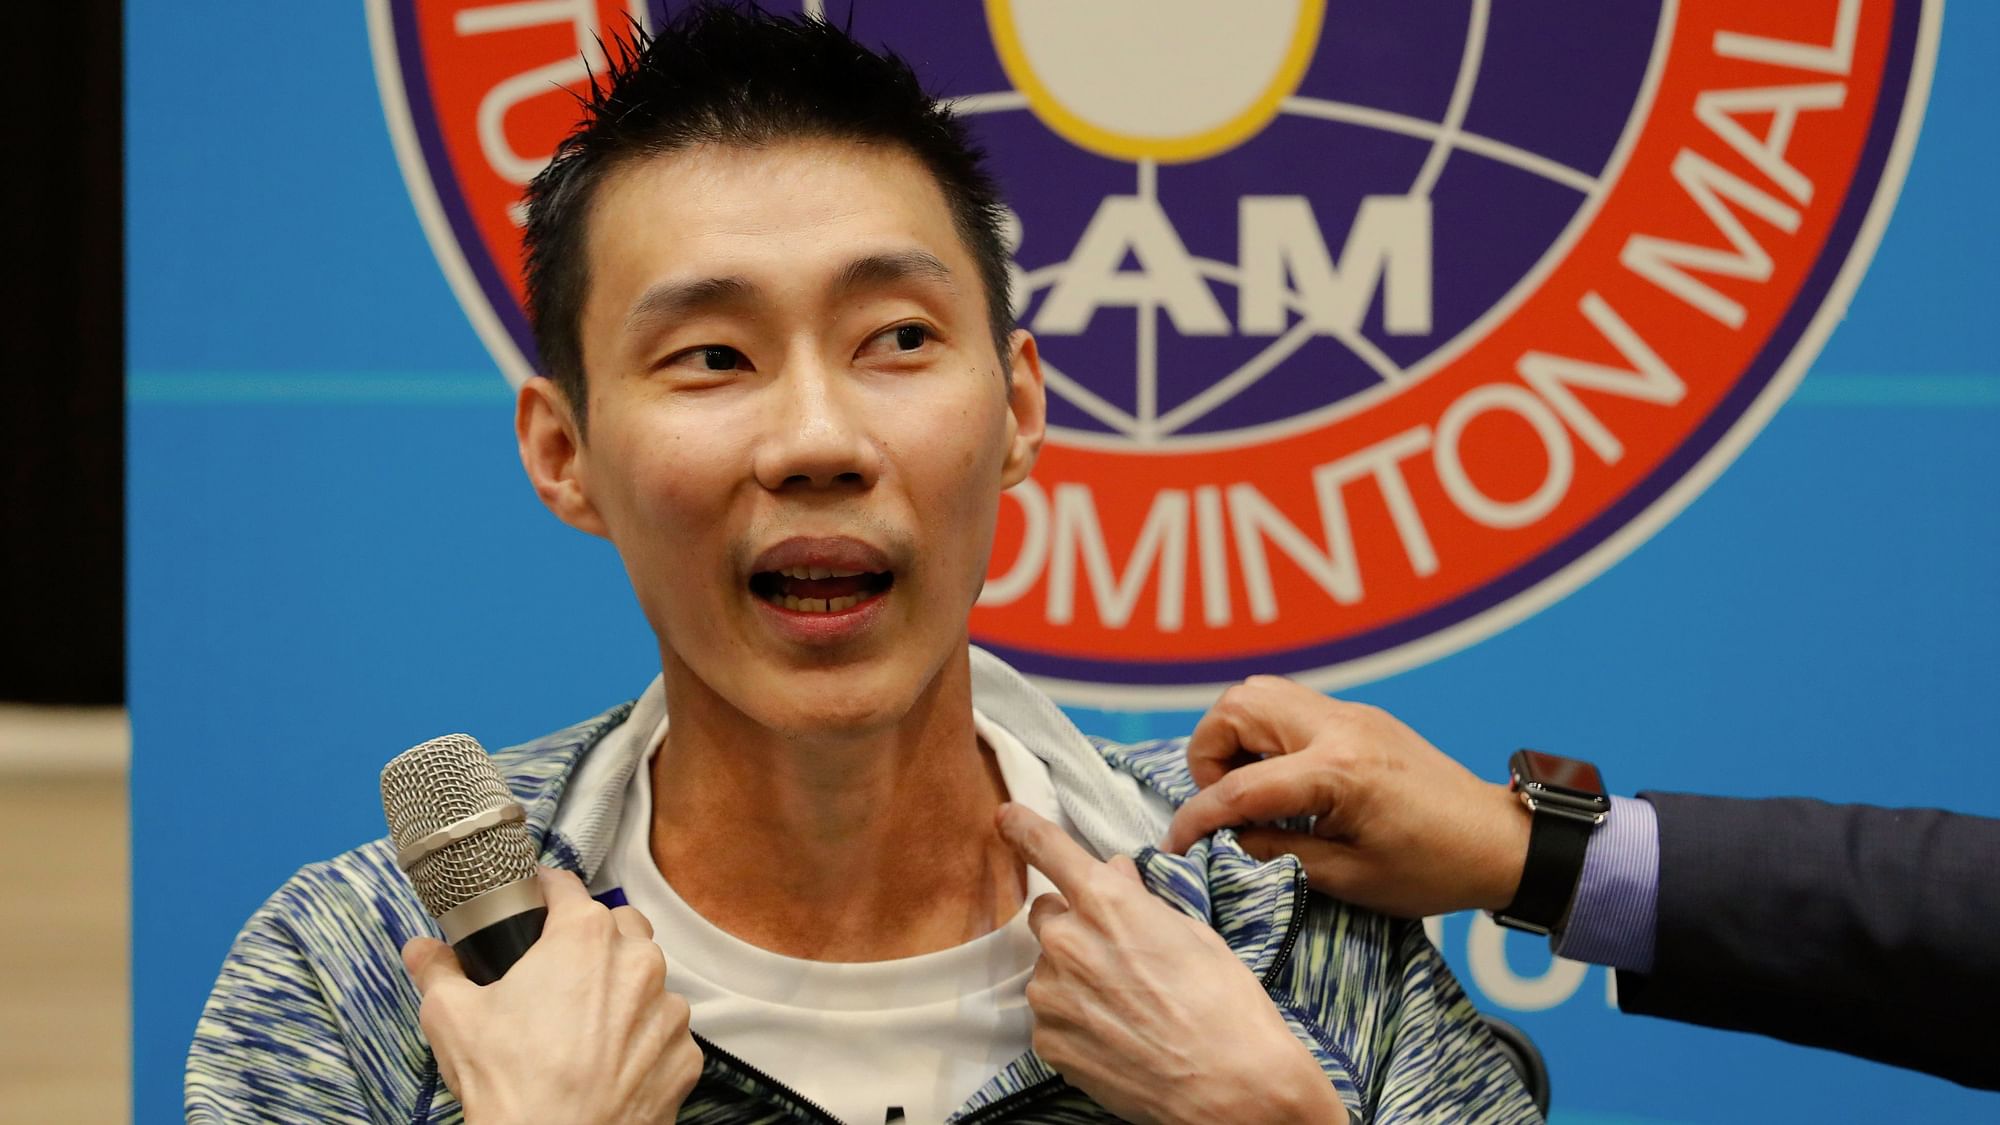 Lee Chong Wei speaks of his battle with cancer at a news conference in Kuala Lumpur